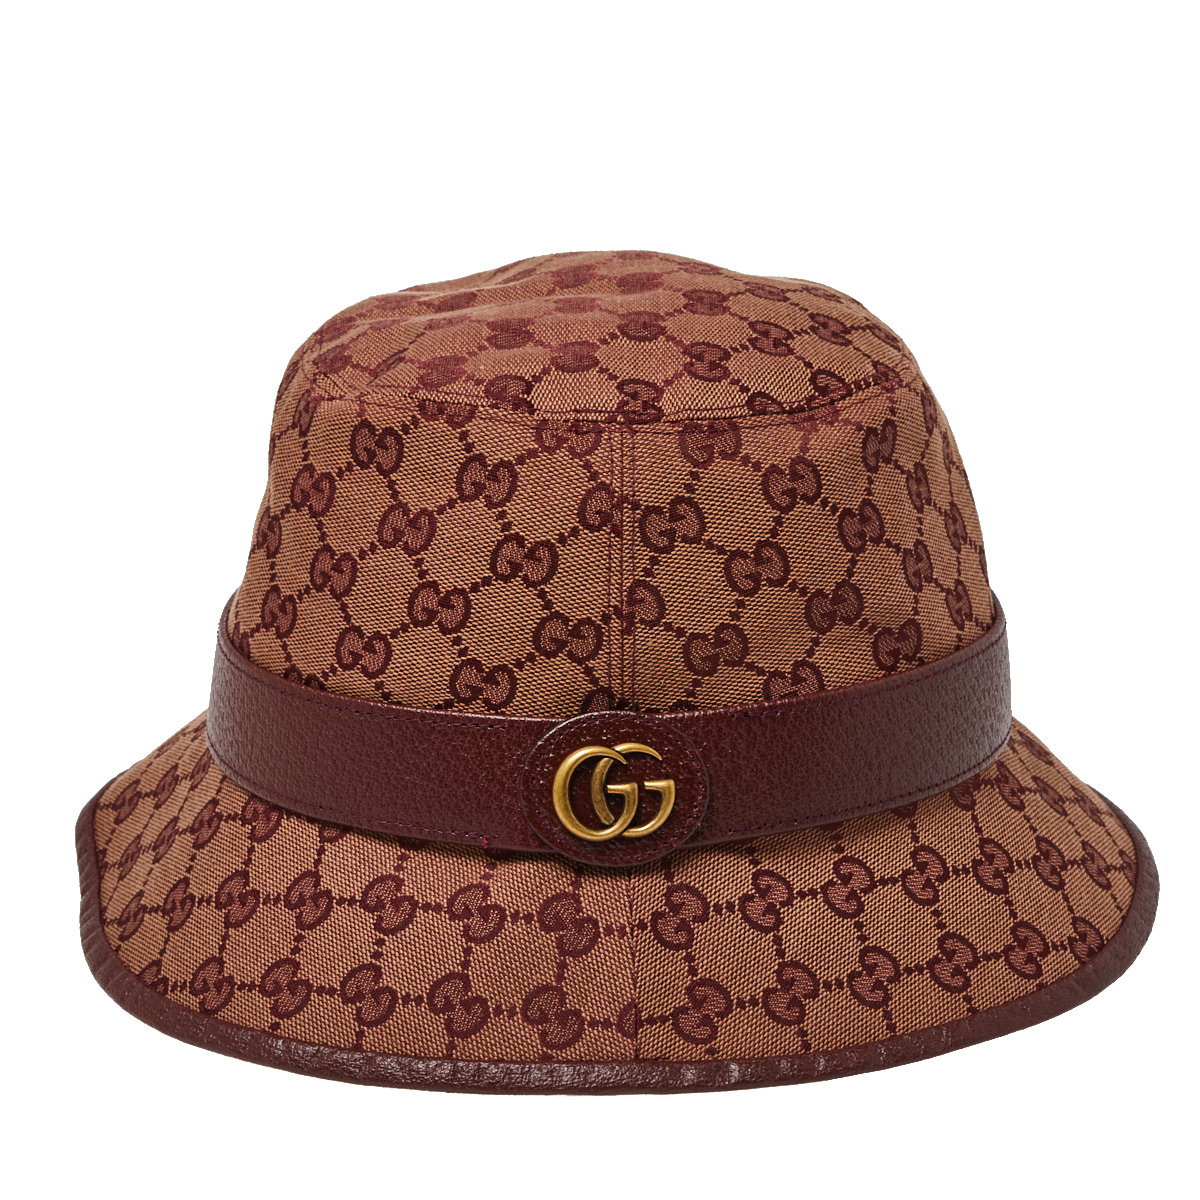 Pre-owned Gucci Burgundy Monogram Canvas Leather Trim Bucket Hat L